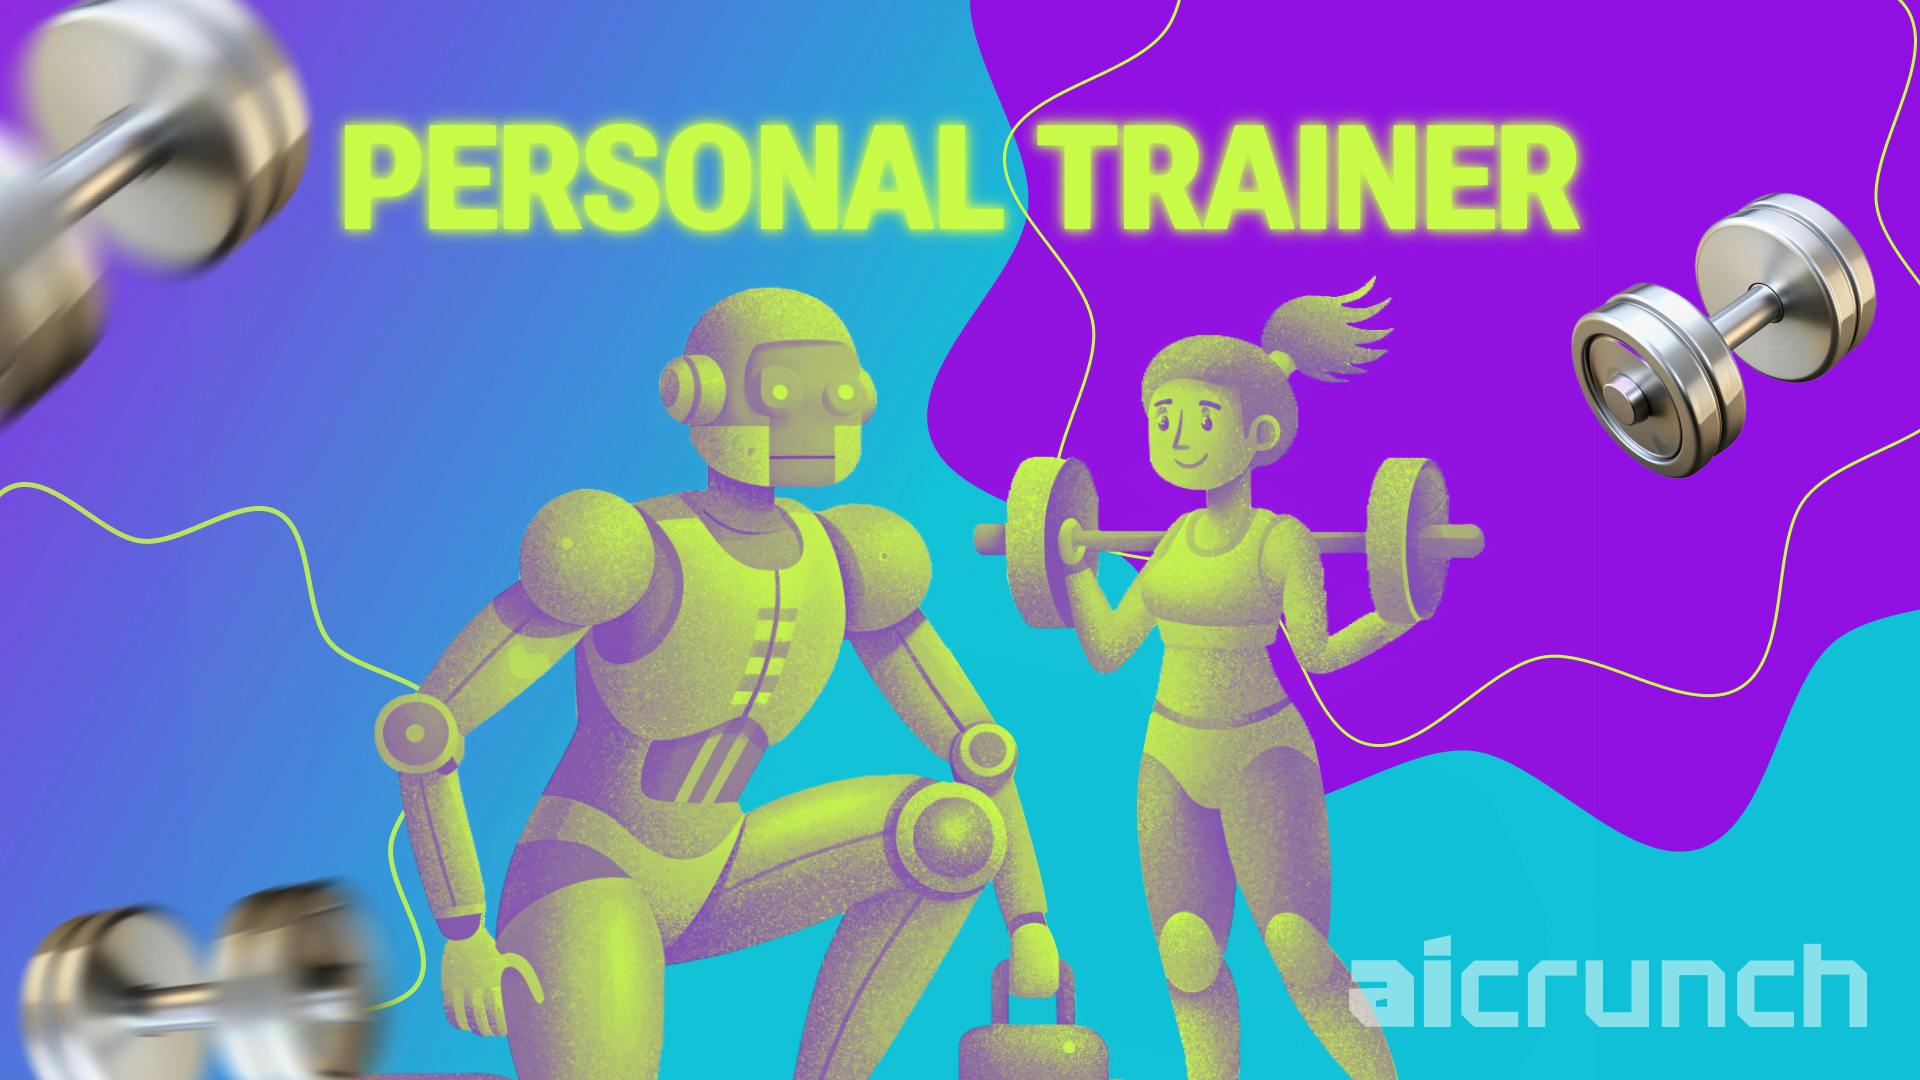 ai-personal-trainers-revolutionizing-fitness